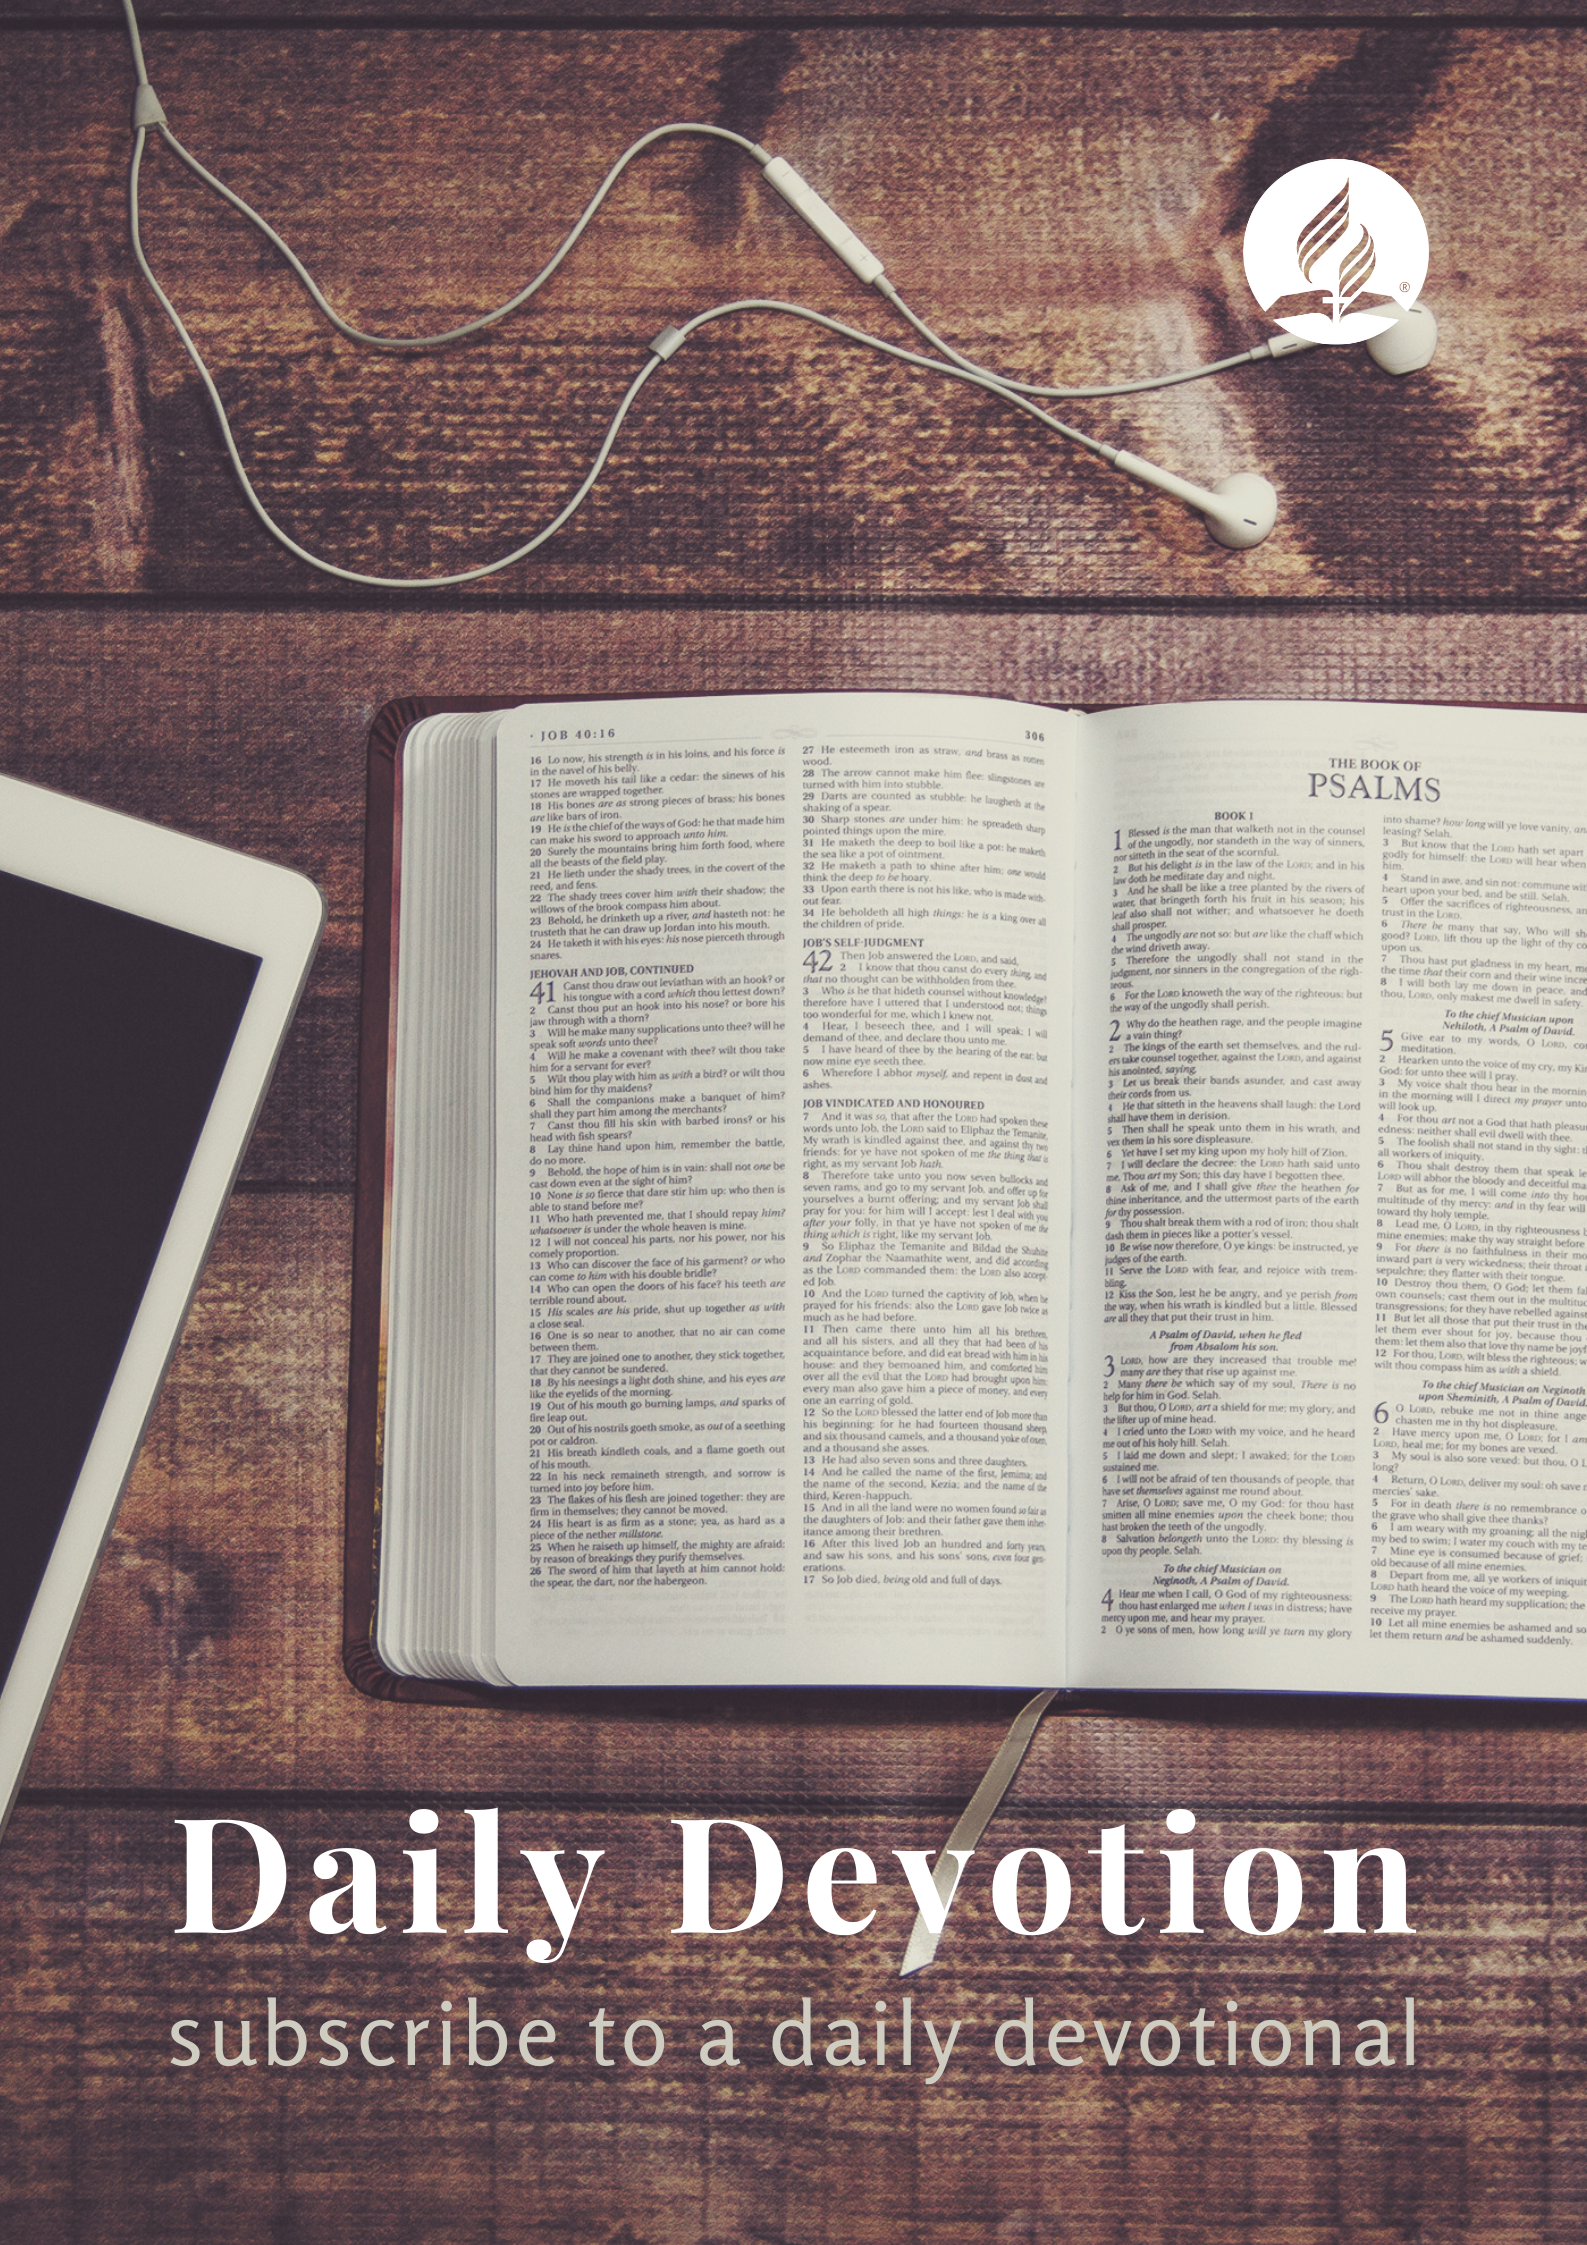 Sign-up for daily devotionals